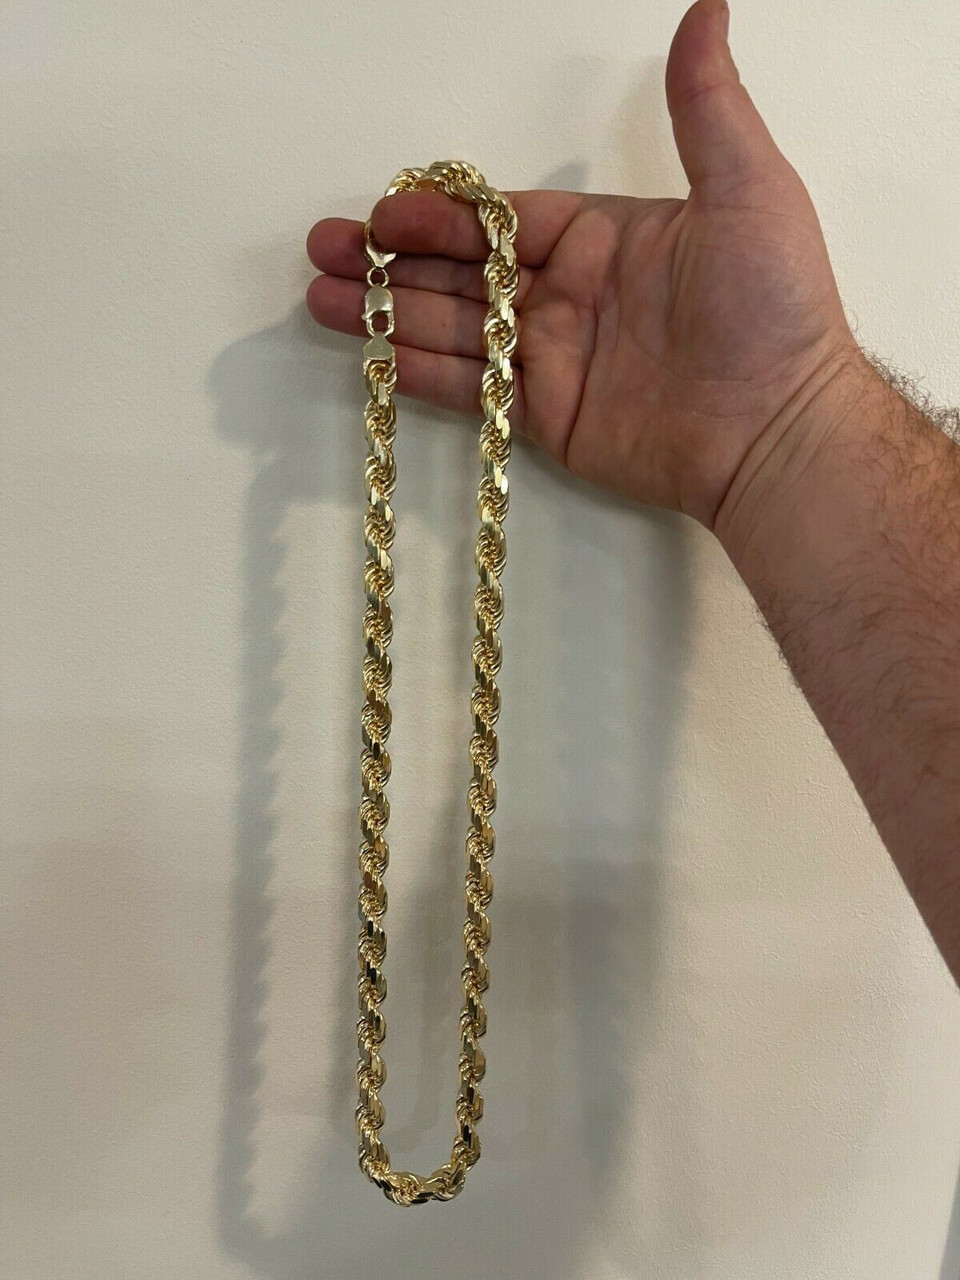 11mm ( 0.43) Width - Premium Quality Gold Silver Chain Strap (Chunky Chain  )